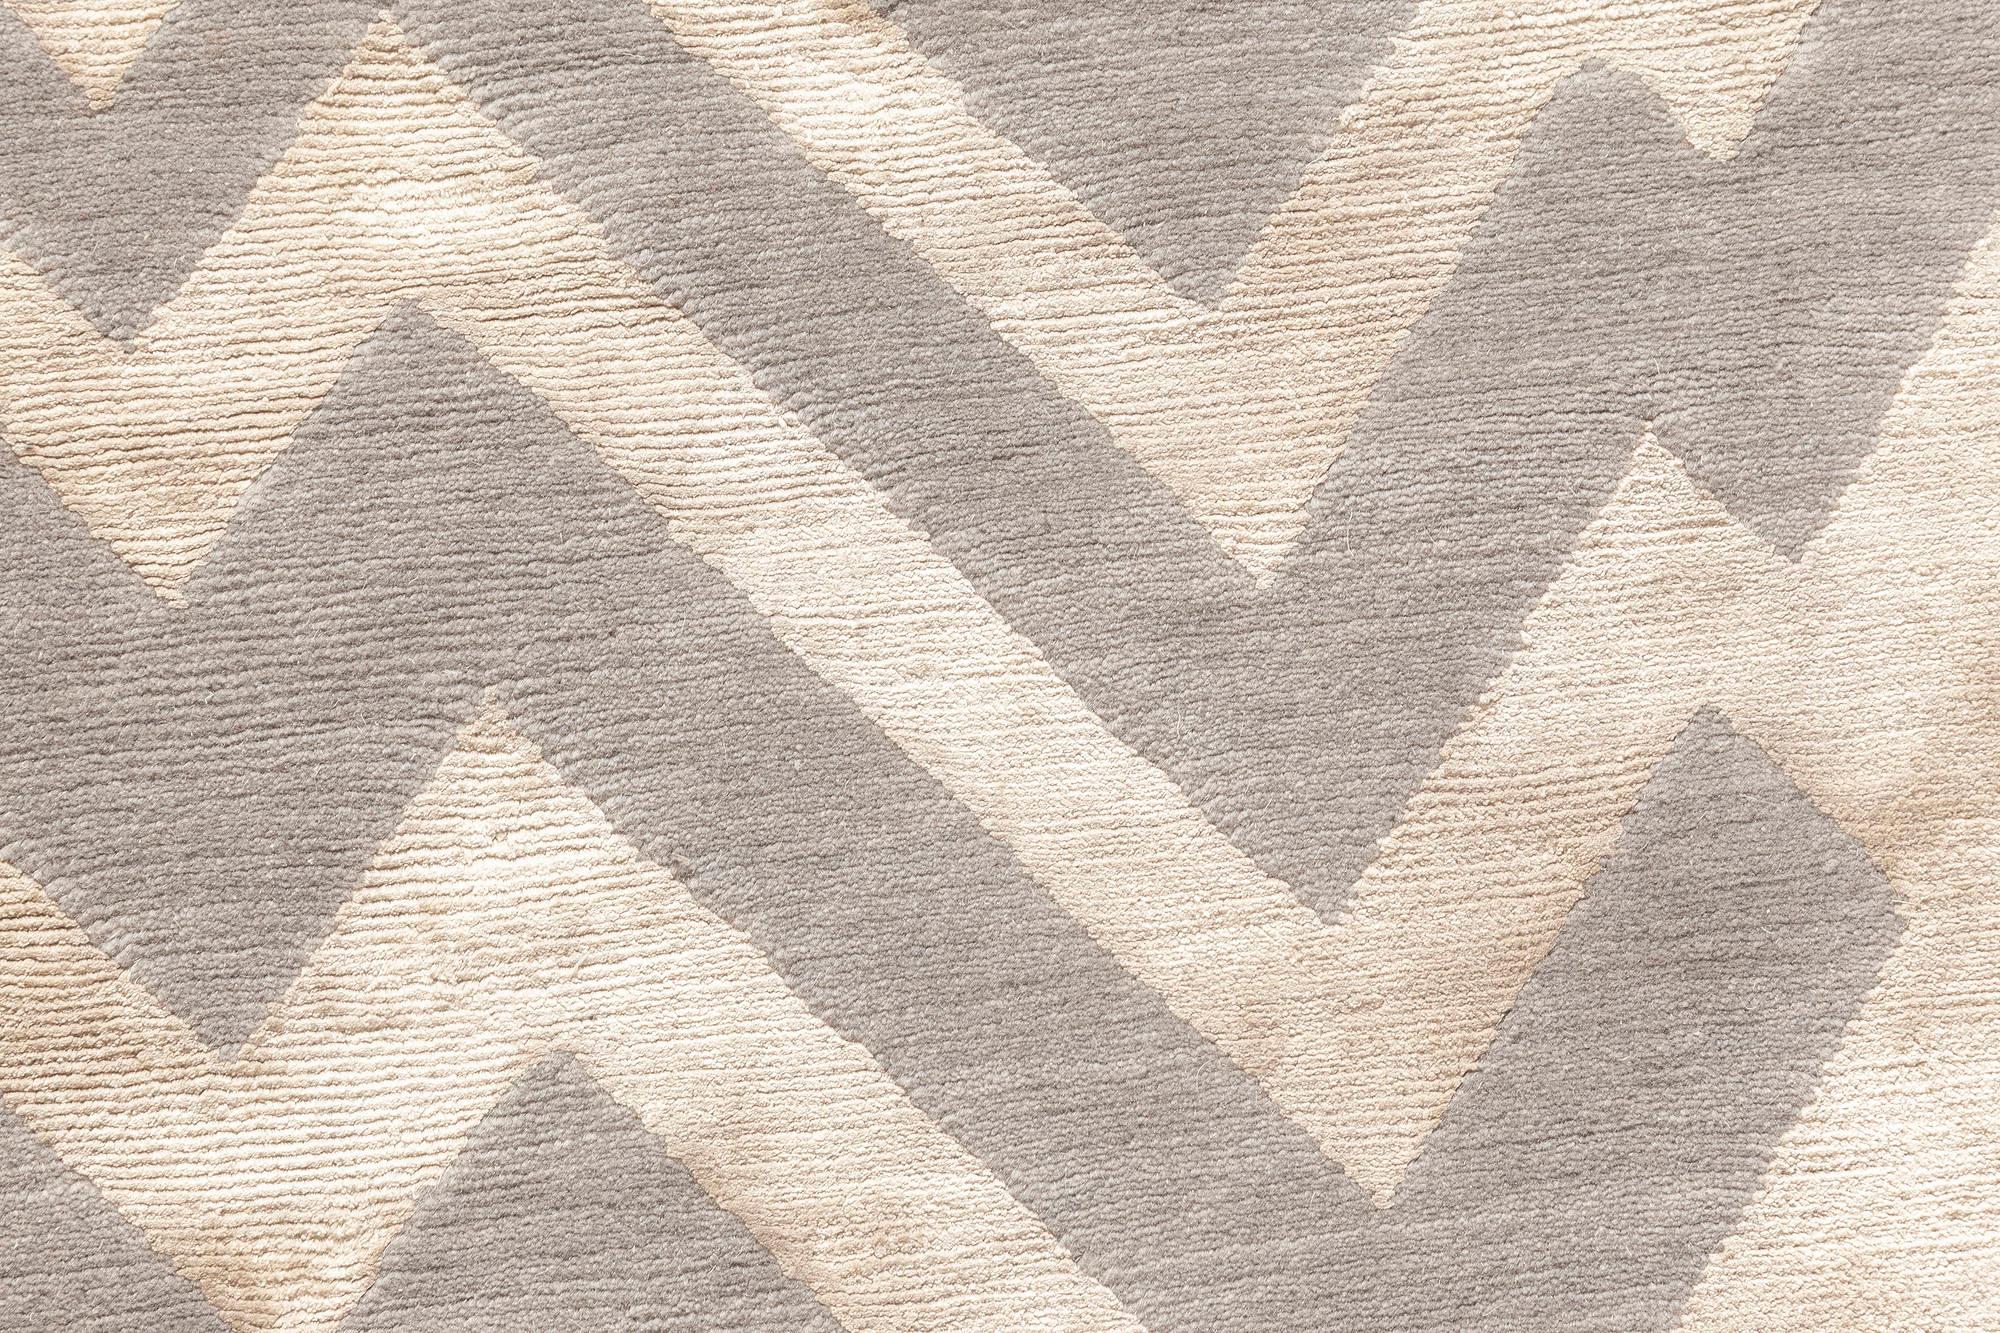 Contemporary rocky peaks beige and grey, silk and wool rug by Doris Leslie Blau.
Size: 5'0